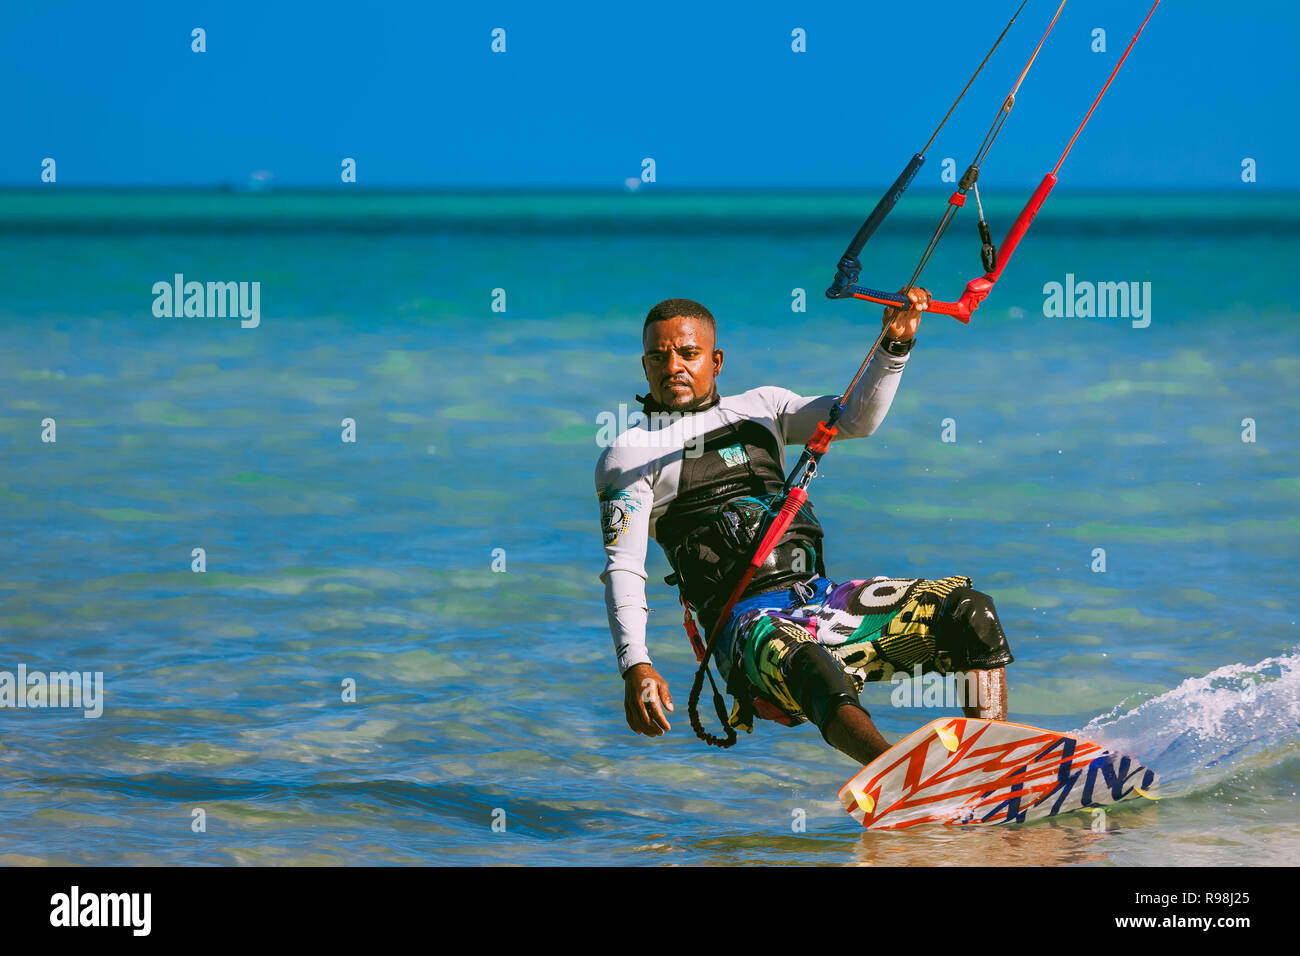 Egypt, Hurghada - 30 November, 2017: Close-up surfer with kite equipment standing on the surfboard. The Red sea shore. Unidentified Arab man surfing o Stock Photo